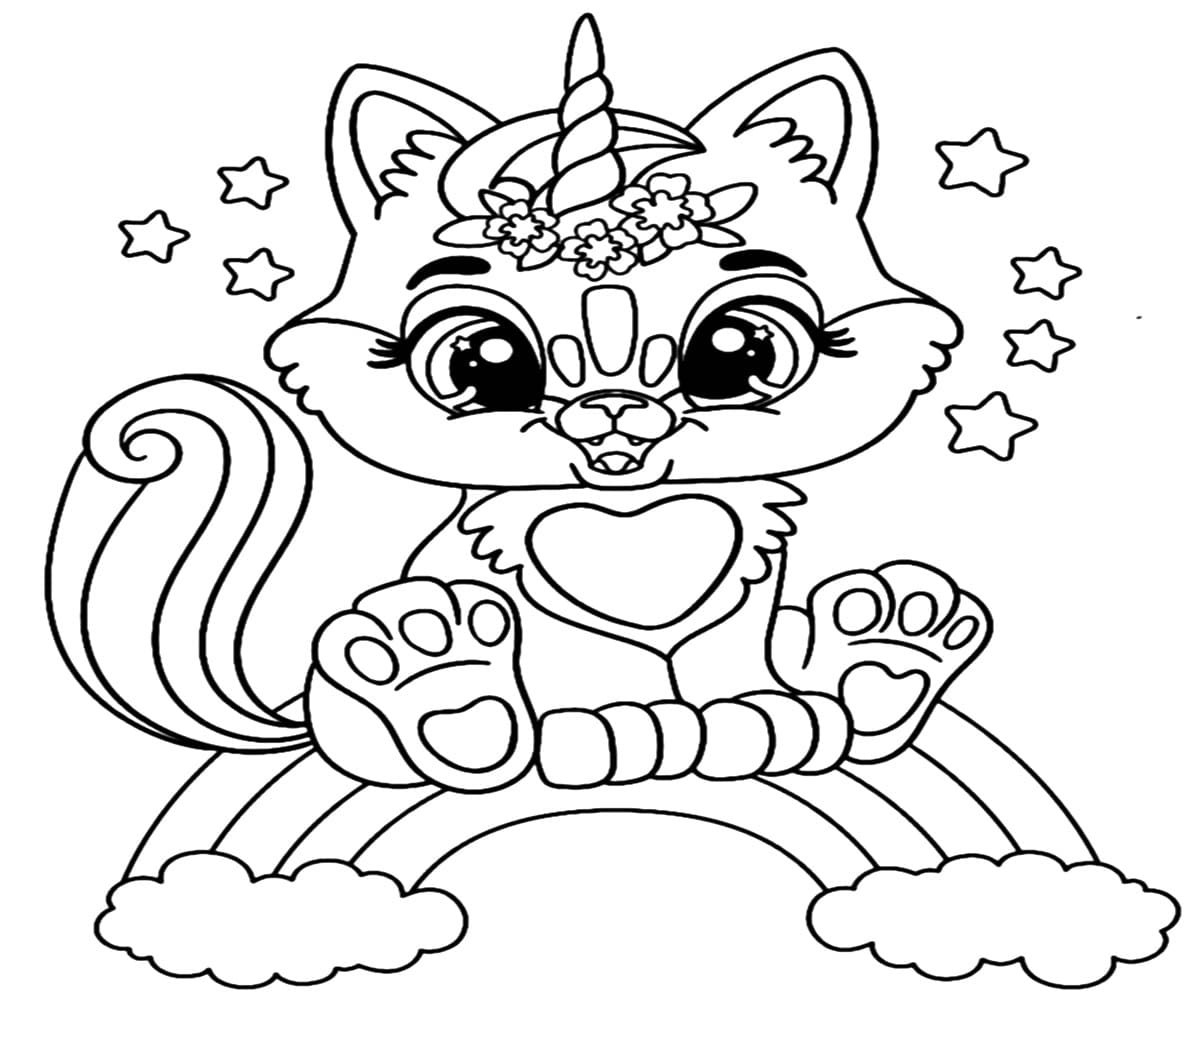 Very cute unicorn cat coloring page